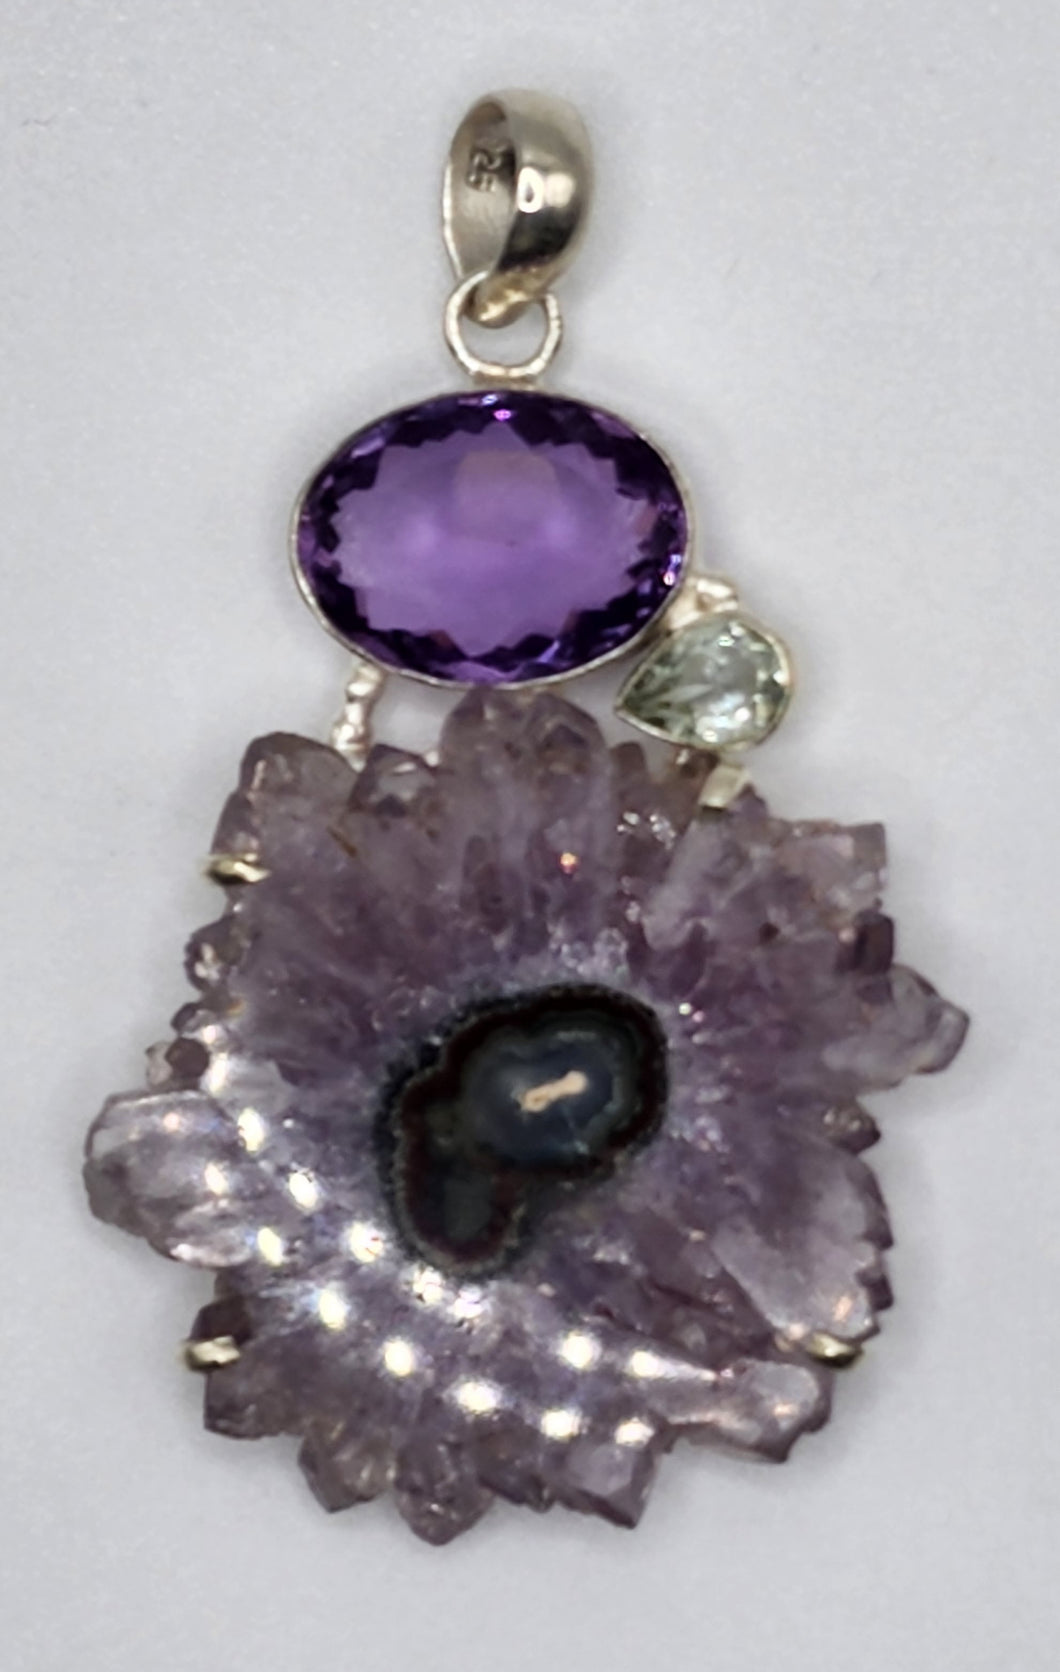 Oval Amethyst Gemstone With Amethyst Stalactite Slice and Green Amethyst Jewel Pendant Set in 925 Sterling Silver